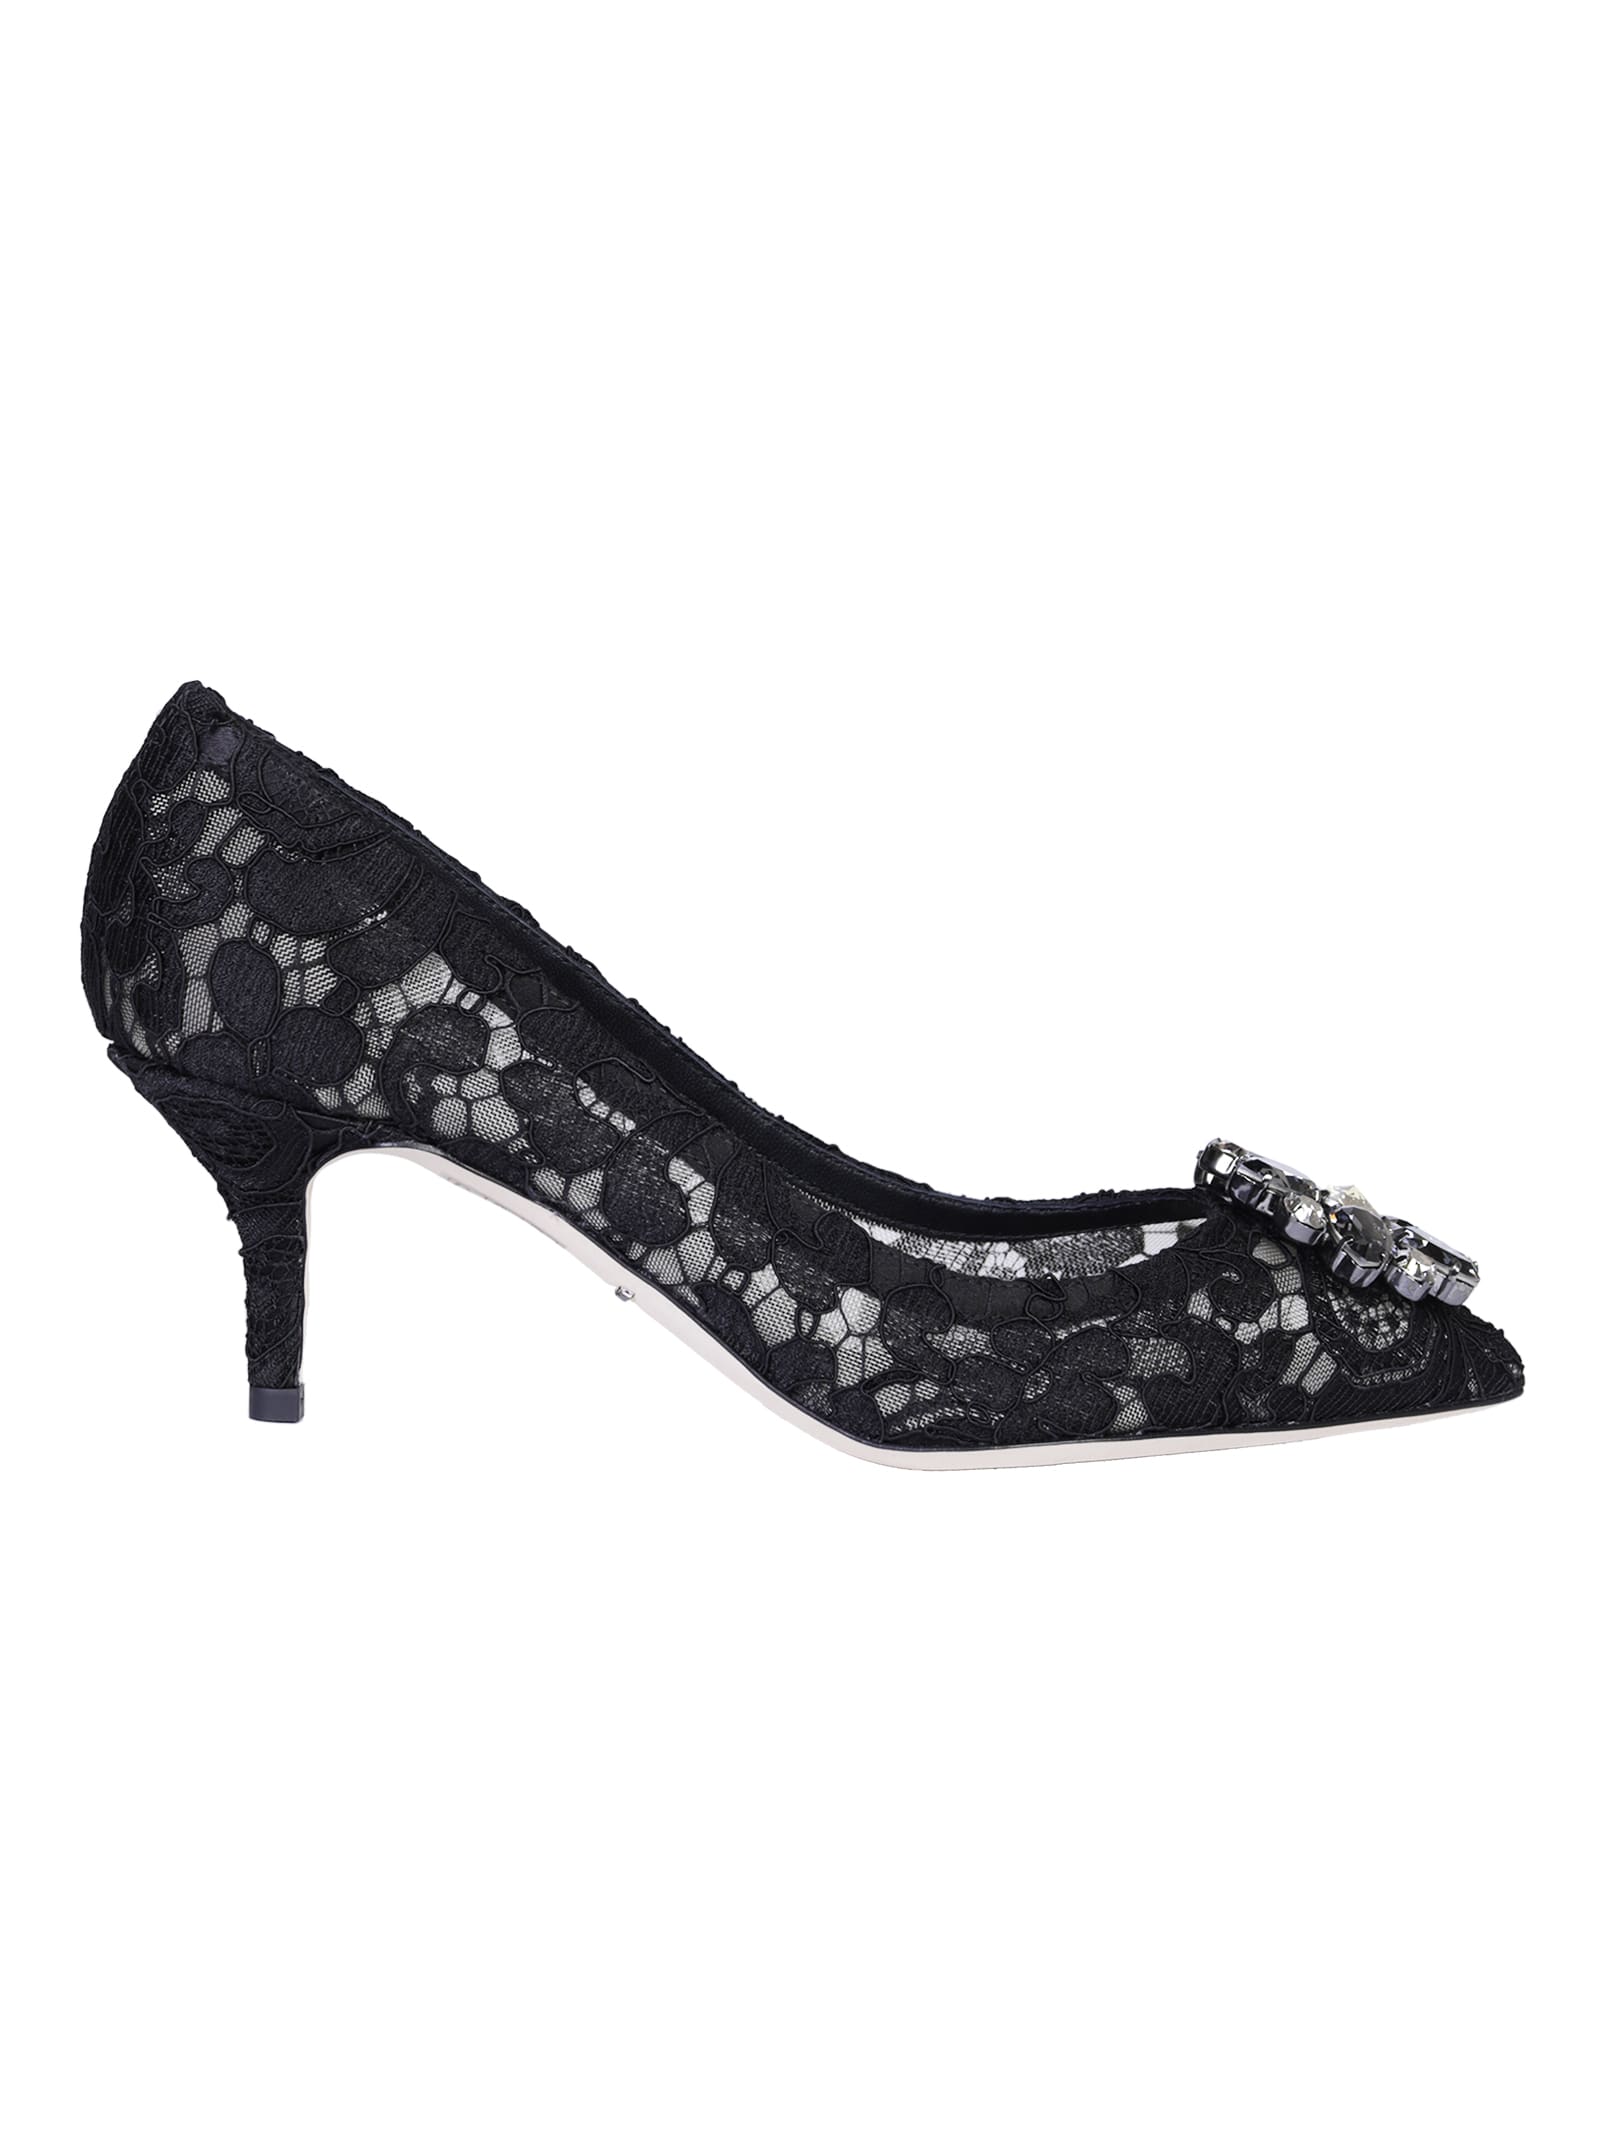 Dolce & Gabbana Embroidered Pumps In Black | ModeSens